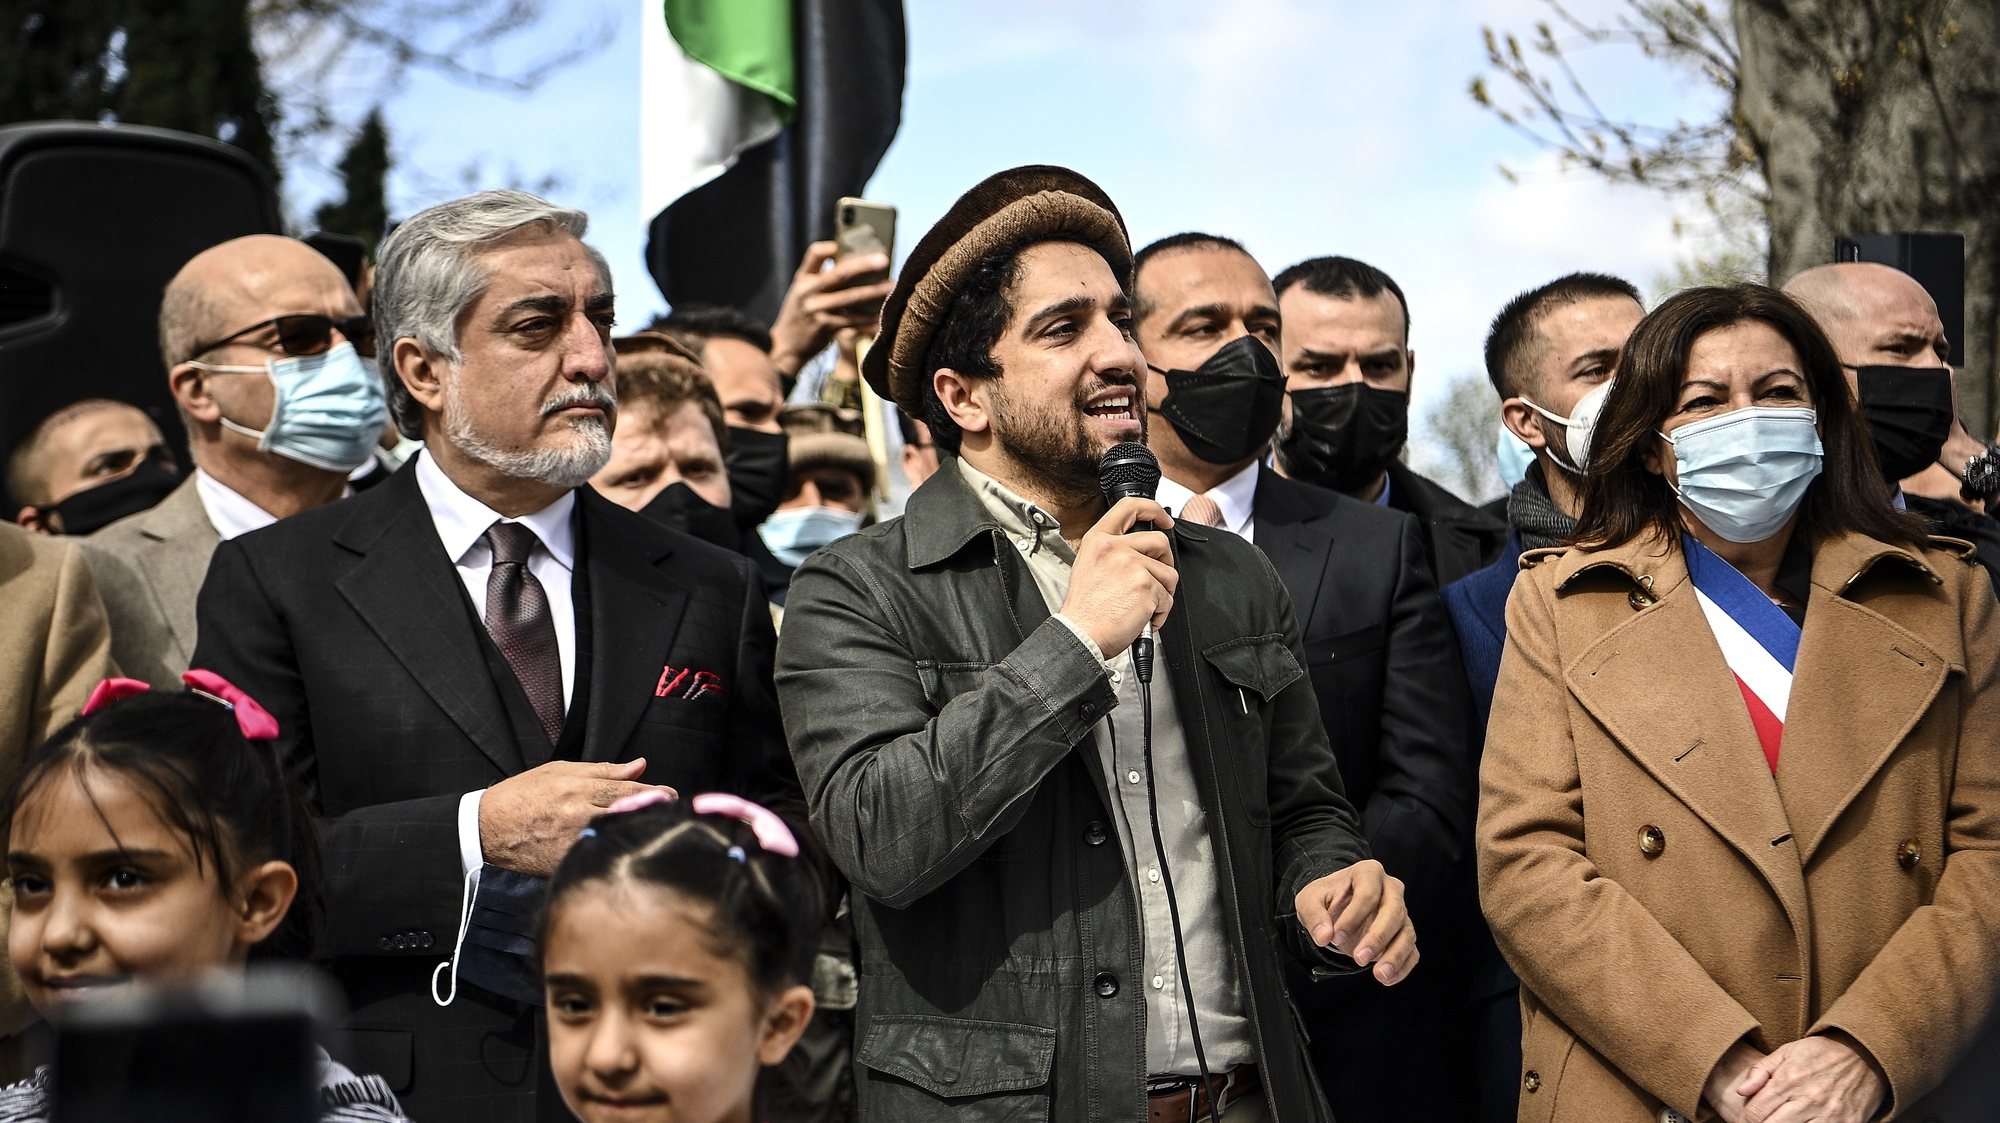 epa09101012 Ahmad Massoud (C), son of late Afghan commander Ahmad Shah Massoud, flanked by Paris Mayor Anne Hidalgo (R) and Chairman of Afghanistan&#039;s High Council for National Reconciliation Abdullah Abdullah (L), addresses supporters on the sidelines of a ceremony to unveil a commemorative plaque in honour of late Afghan anti-Taliban commander Massoud in an alley along the Champs-Elysees Avenue in Paris, France, 27 March 2021.  EPA/CHRISTOPHE ARCHAMBAULT / POOL  MAXPPP OUT